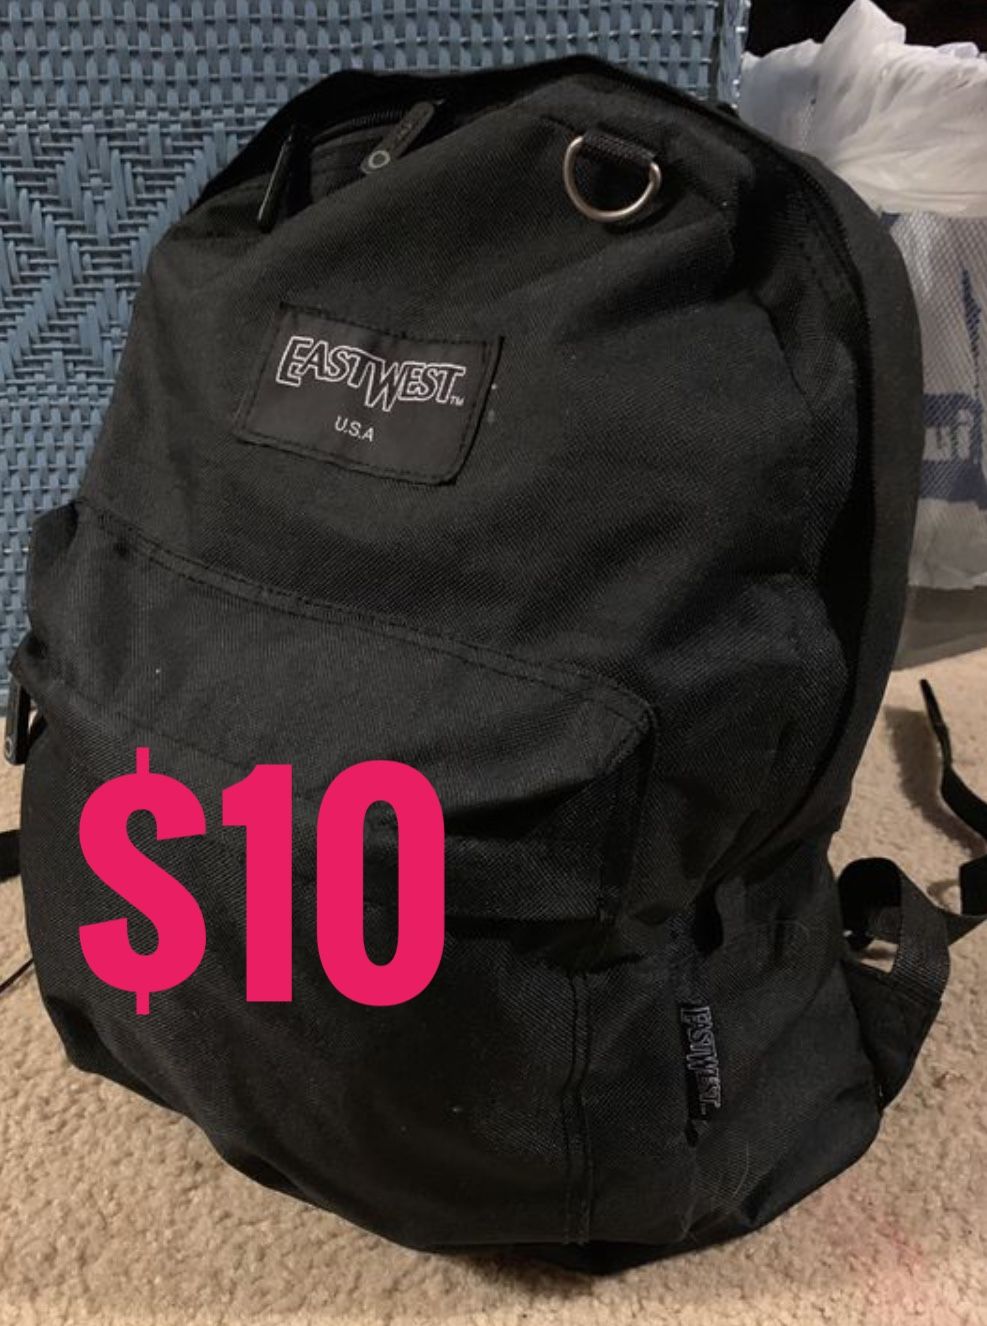 Eastwest backpack - mid-sized - clean